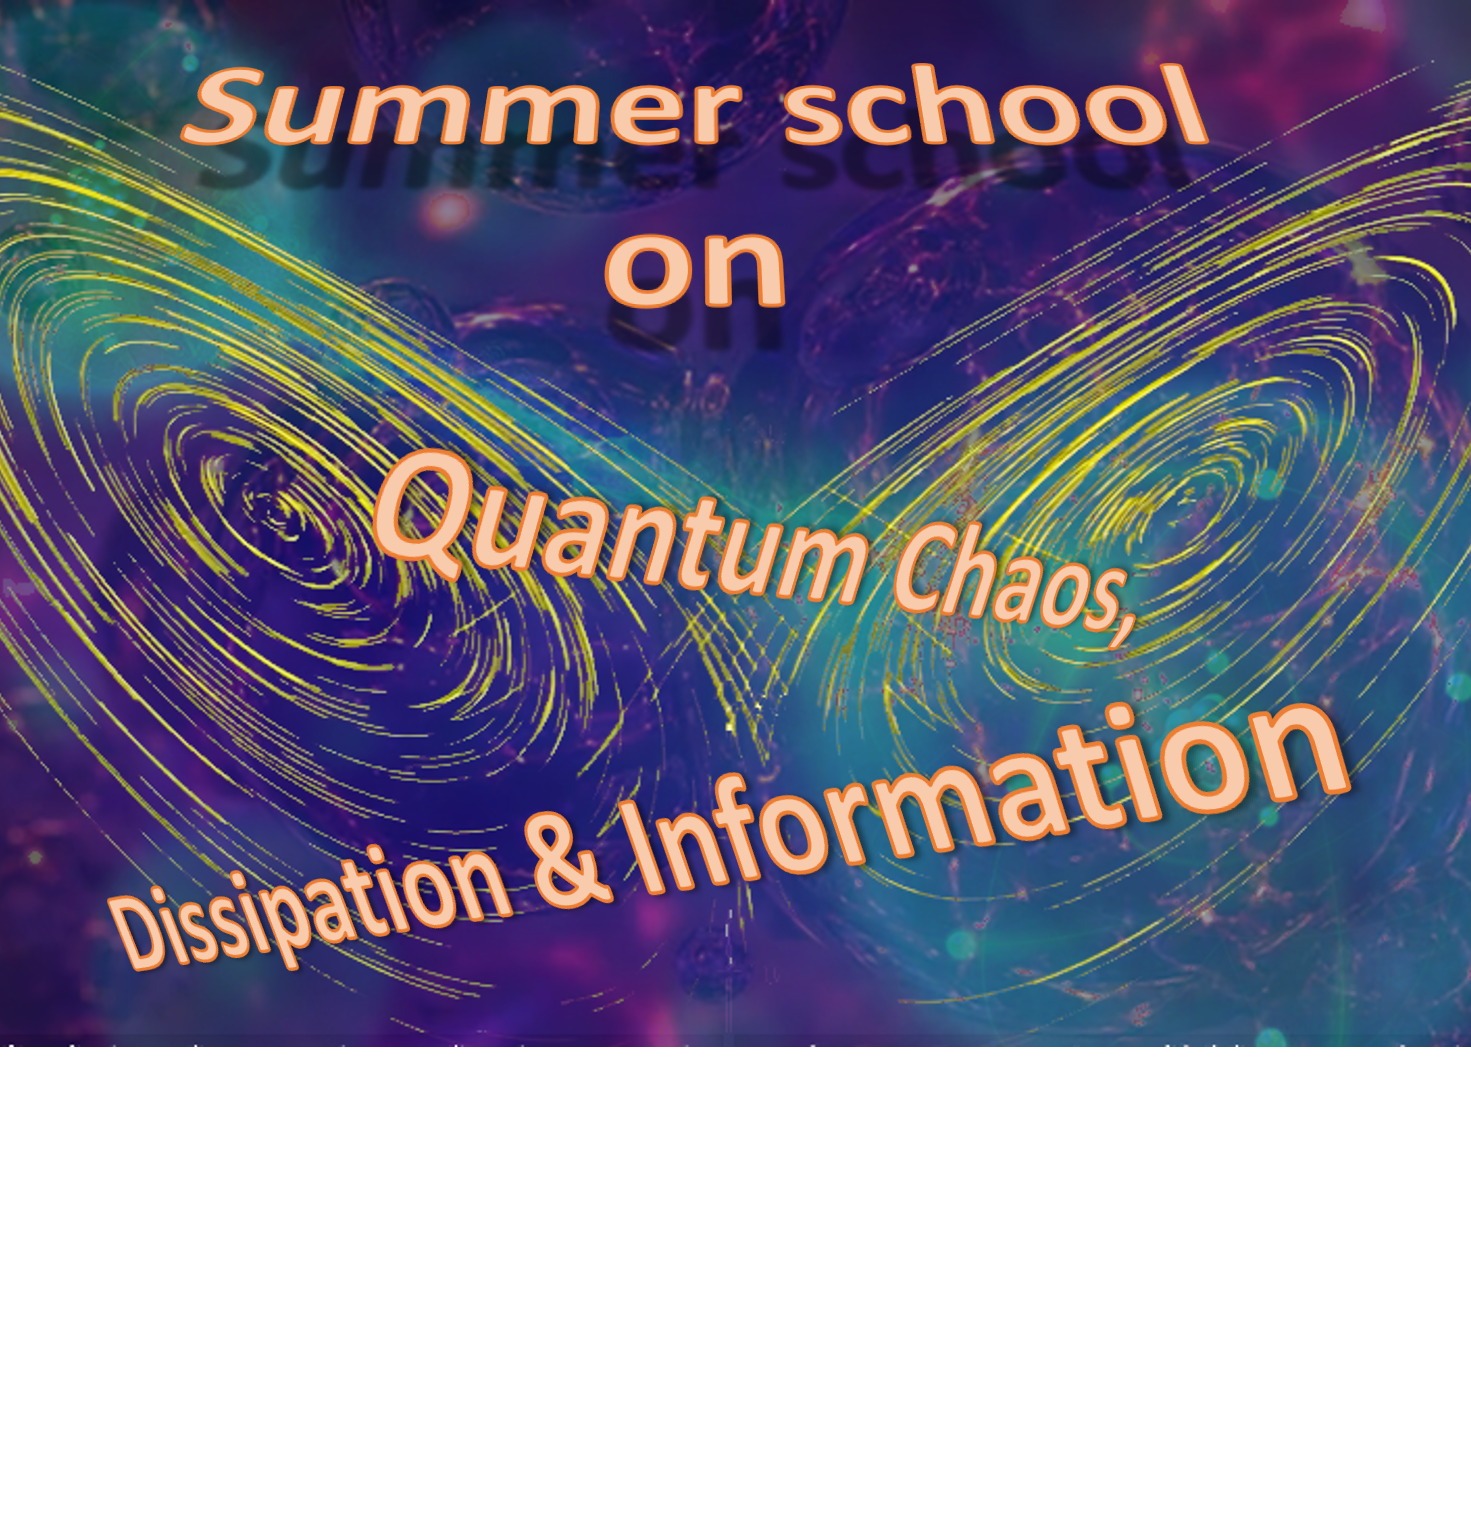 Summer school on Quantum Chaos, Dissipation and Information